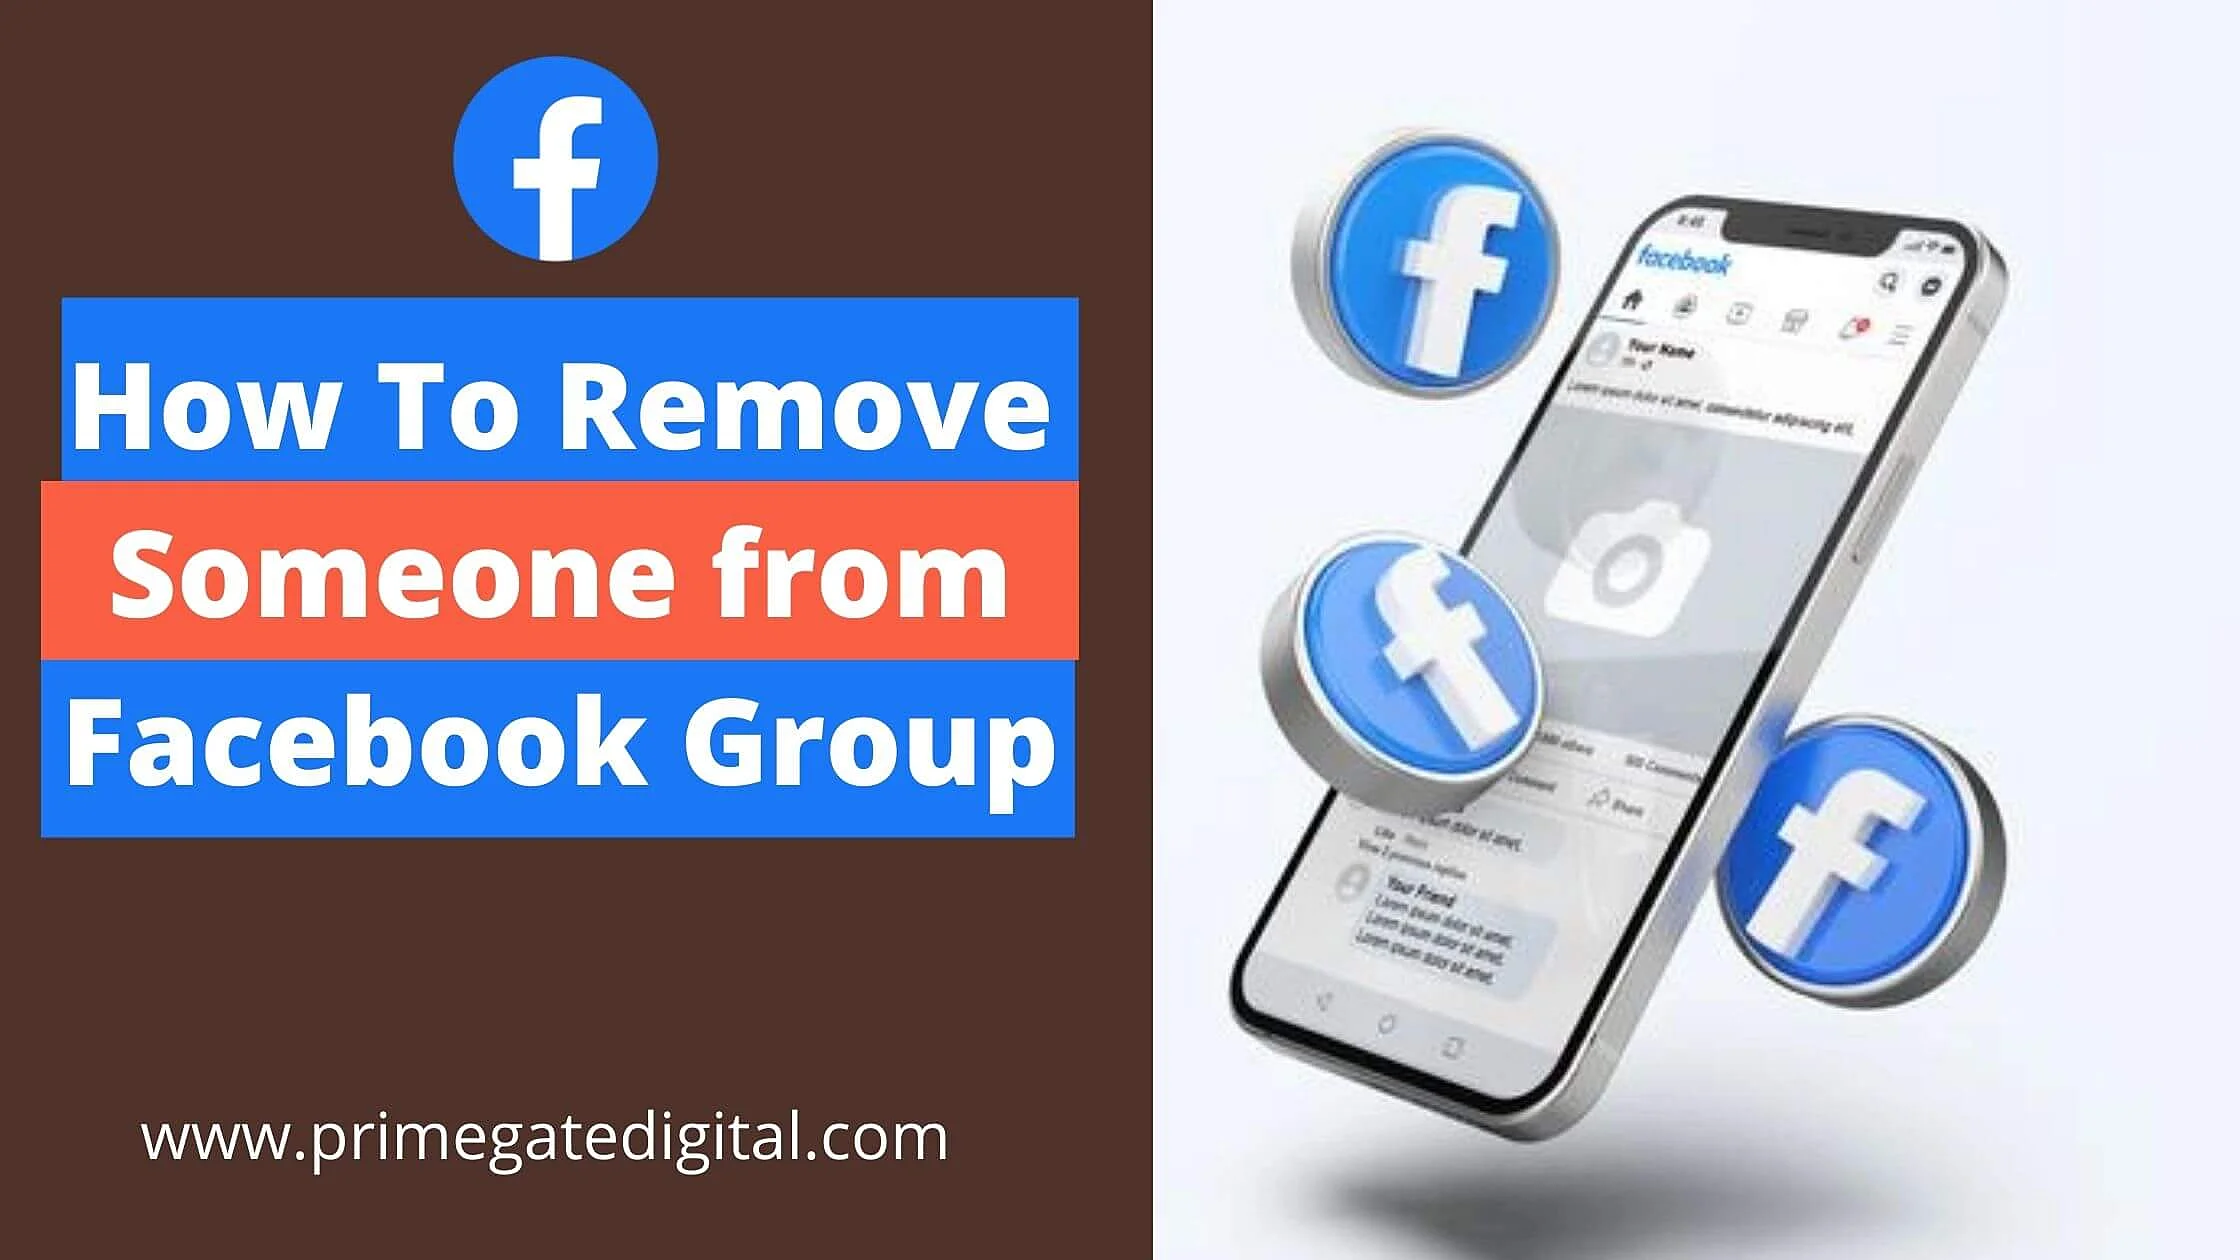 How To Remove Someone from Facebook Group